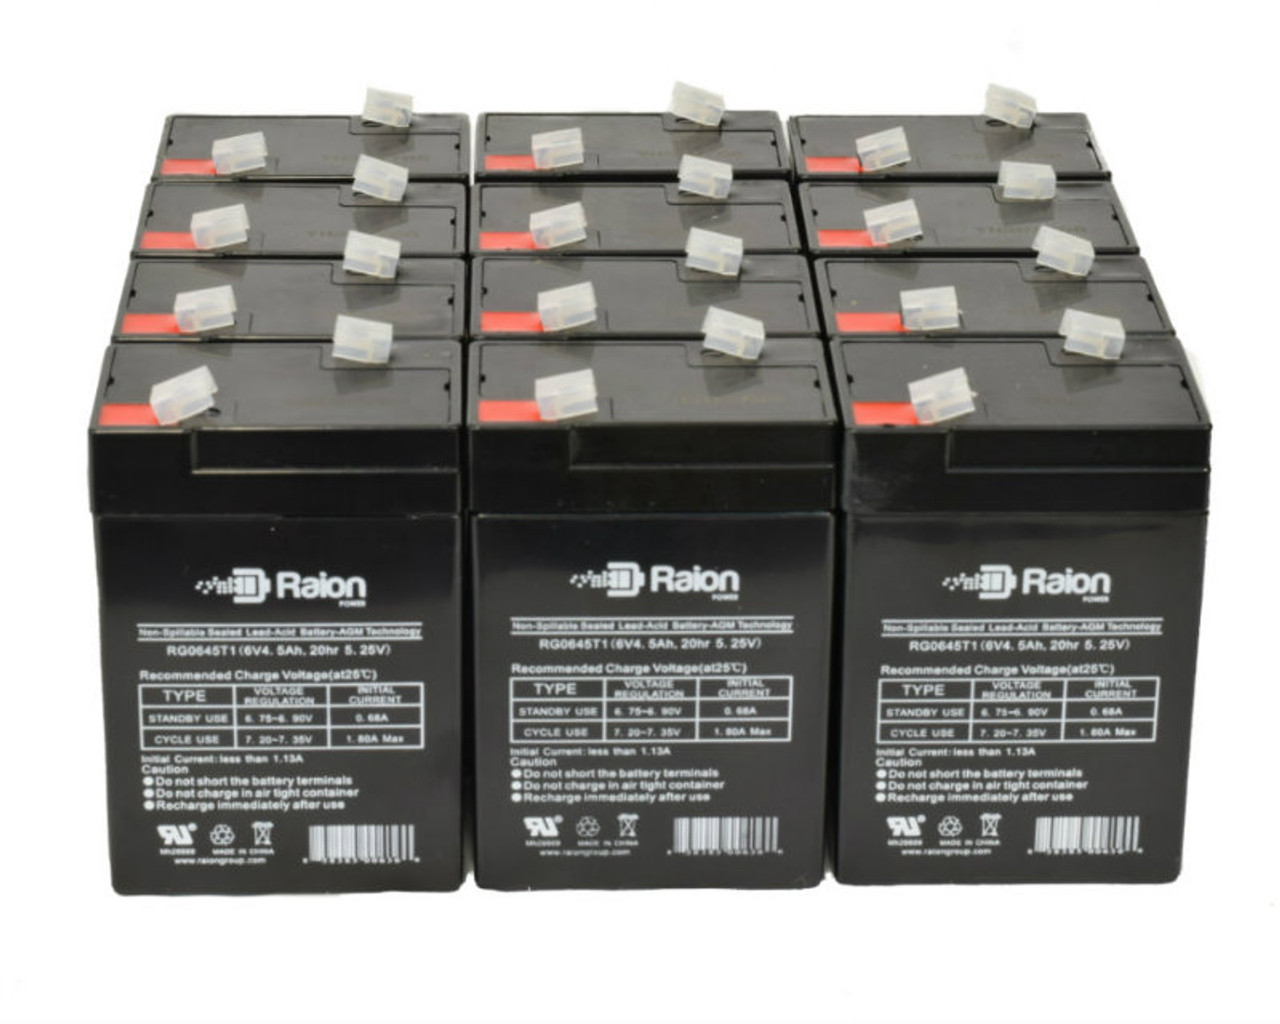 Raion Power 6 Volt 4.5Ah RG0645T1 Replacement Battery for Delta HR 6-4.5 - 12 Pack